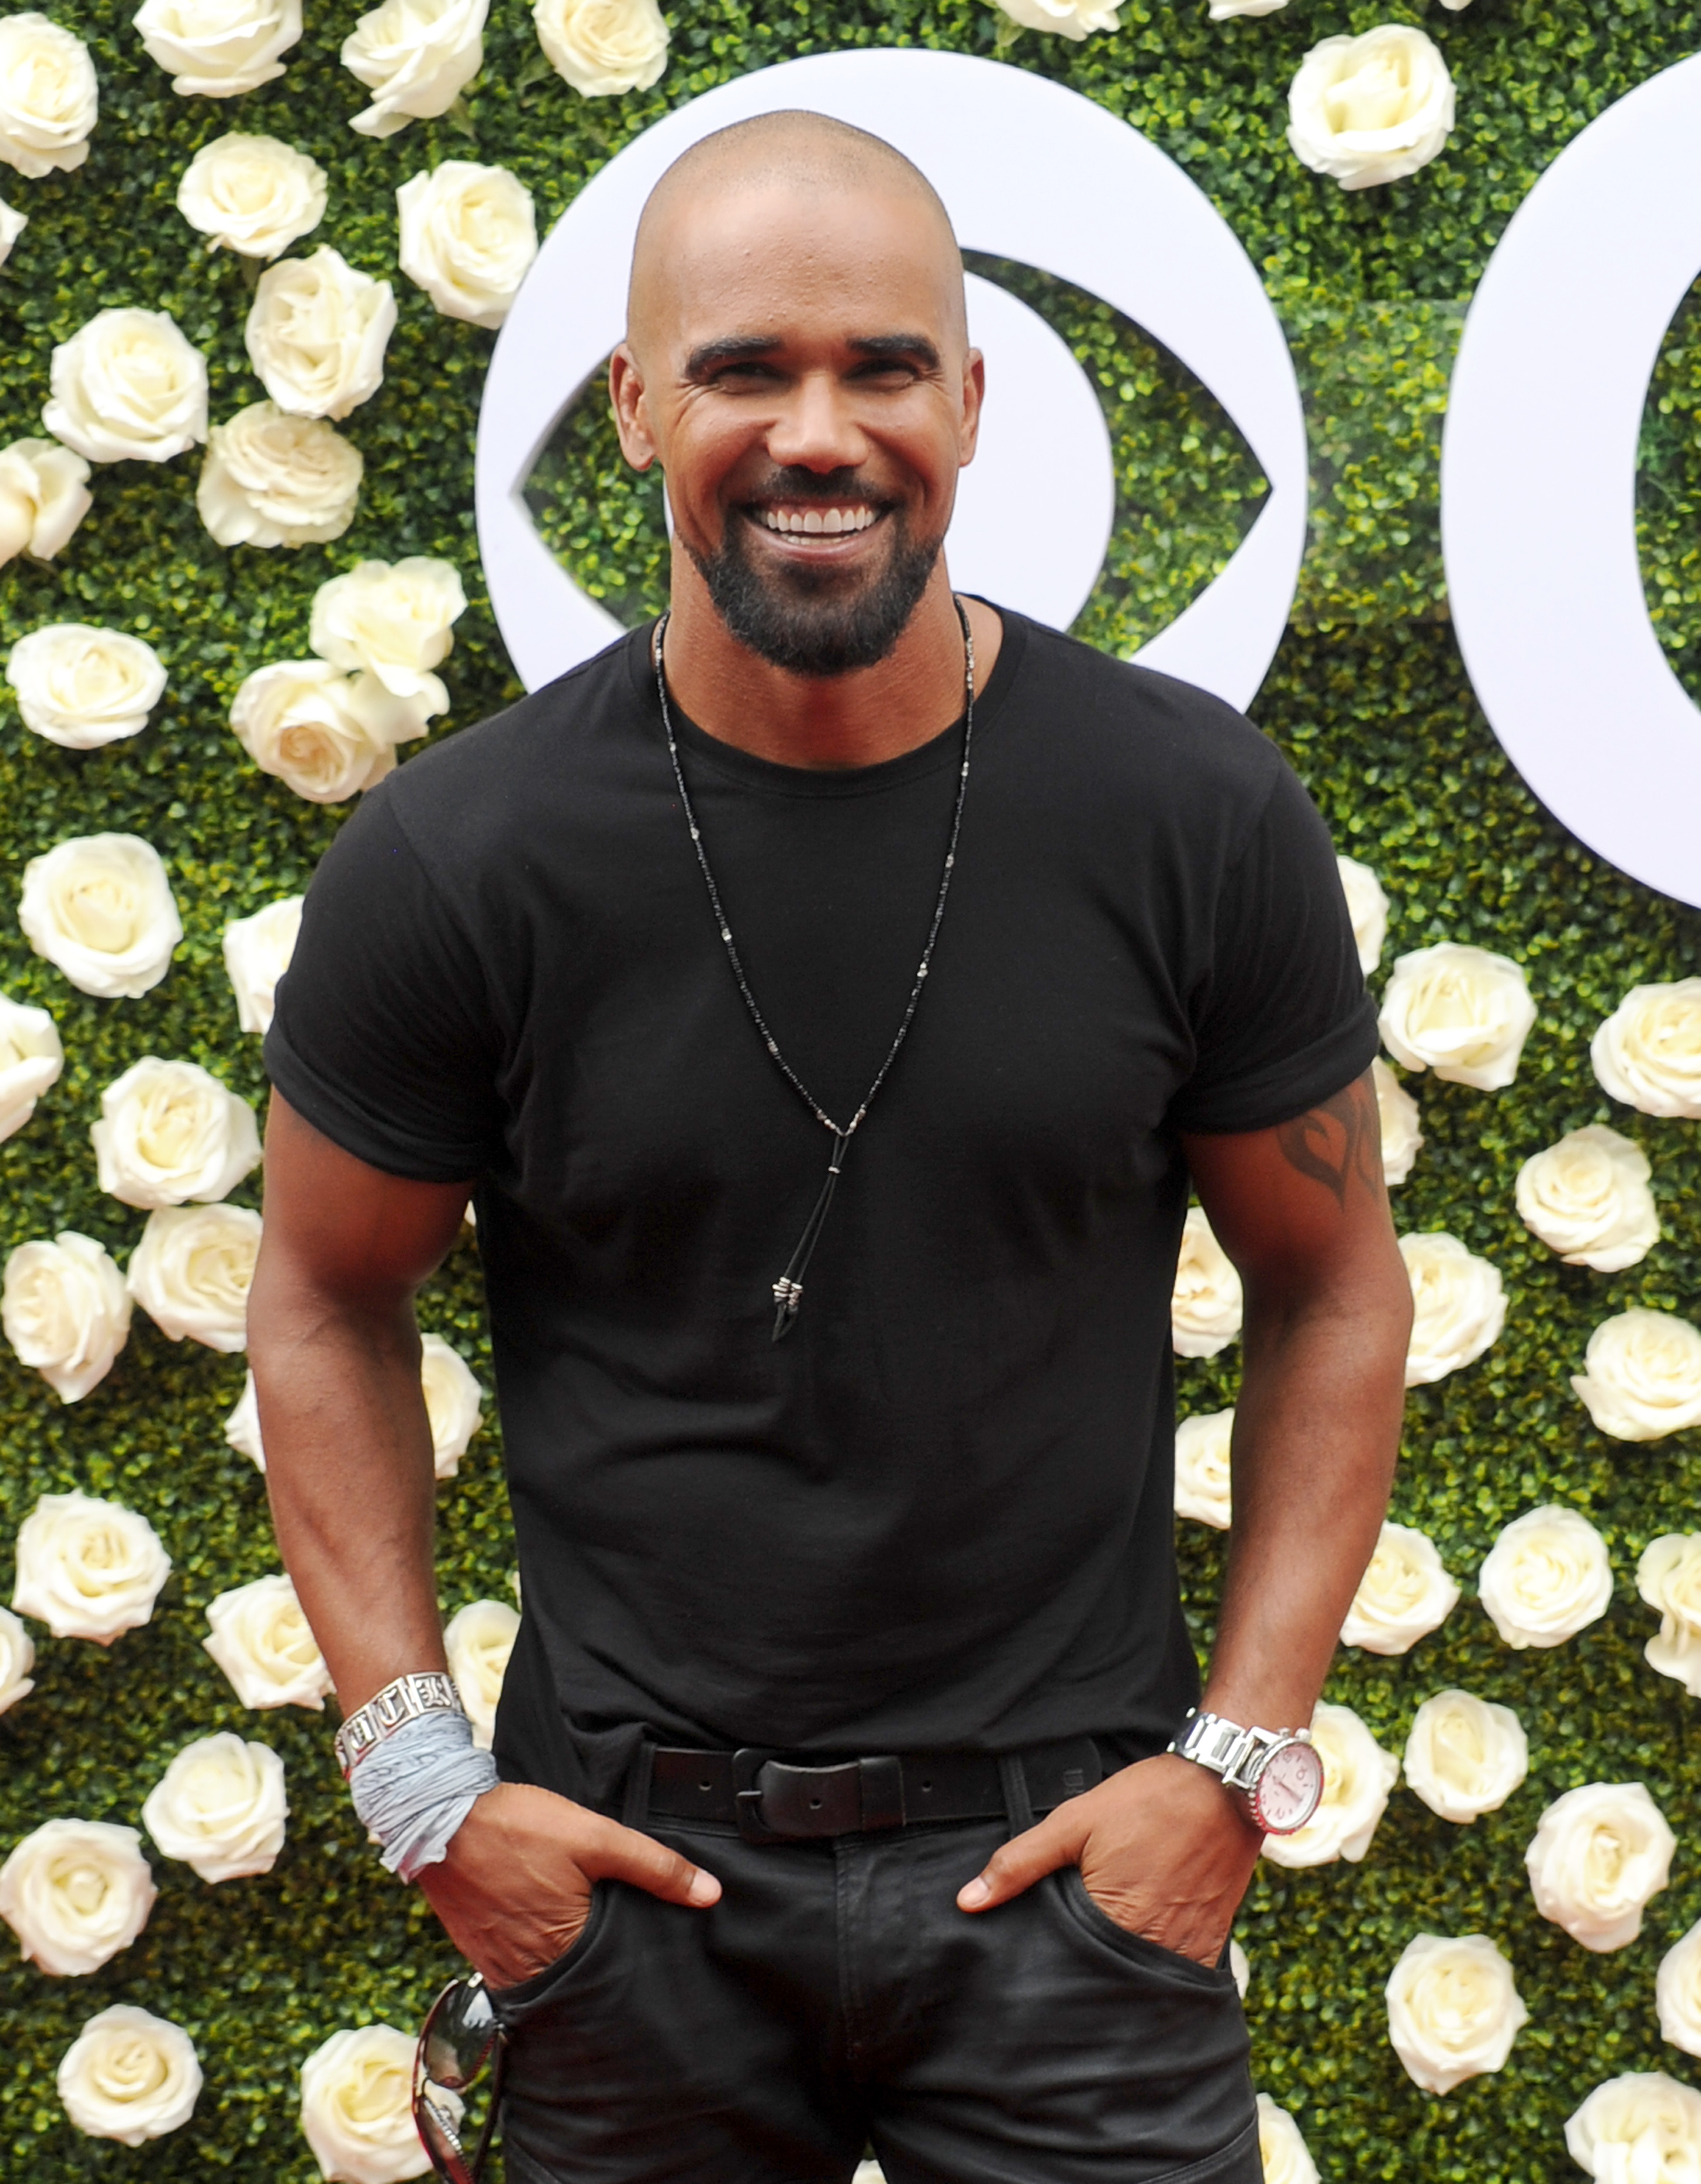 Shemar Moore arrives at the Summer TCA Tour on August 1, 2017 in Studio City, California | Source: Getty Images